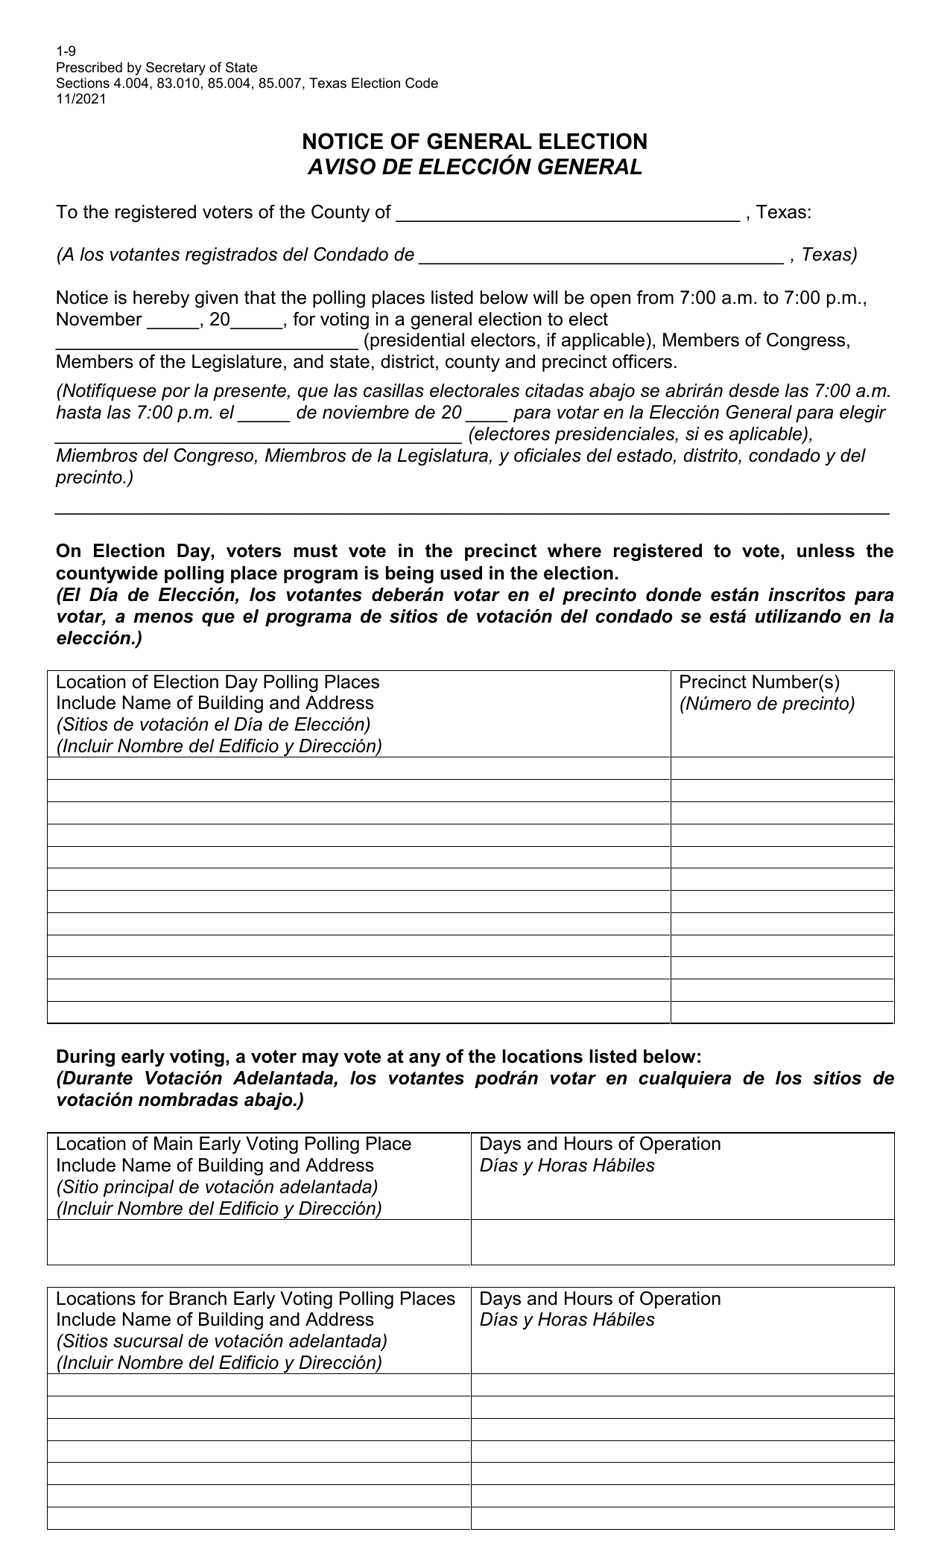 Form 1-9 Notice of General Election - Texas (English / Spanish), Page 1